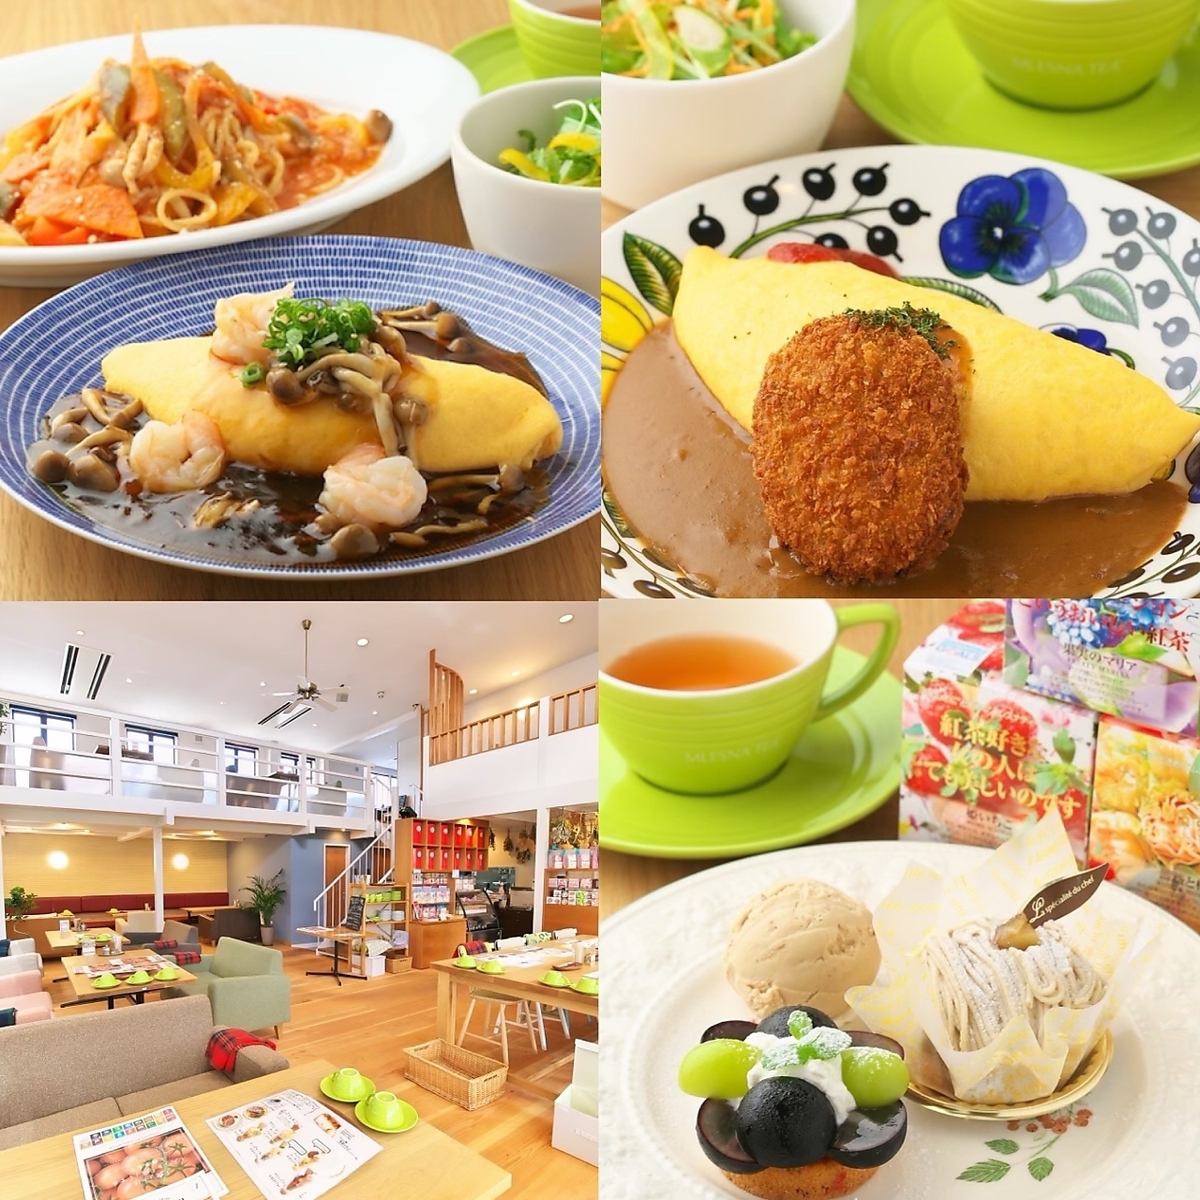 Tea specialty store ♪ Cafe & restaurant that sticks to safe meals with carefully selected ingredients